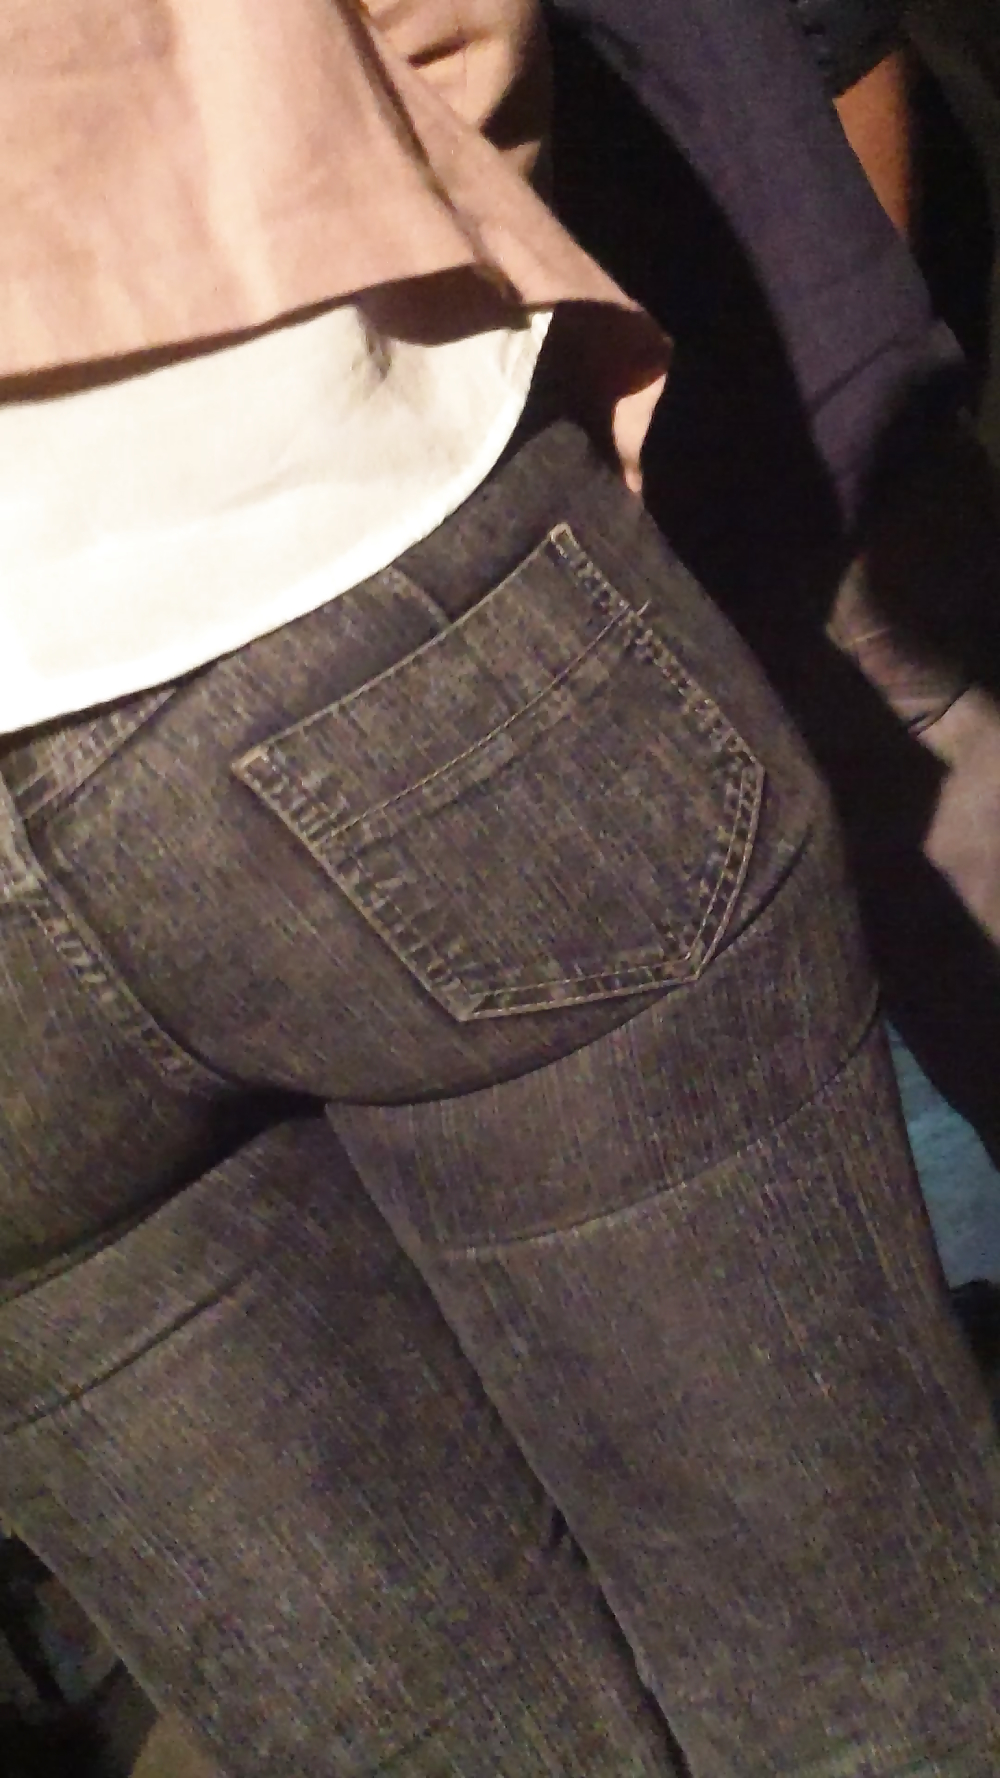 Tight teen butts & ass in jeans up close  #20660949